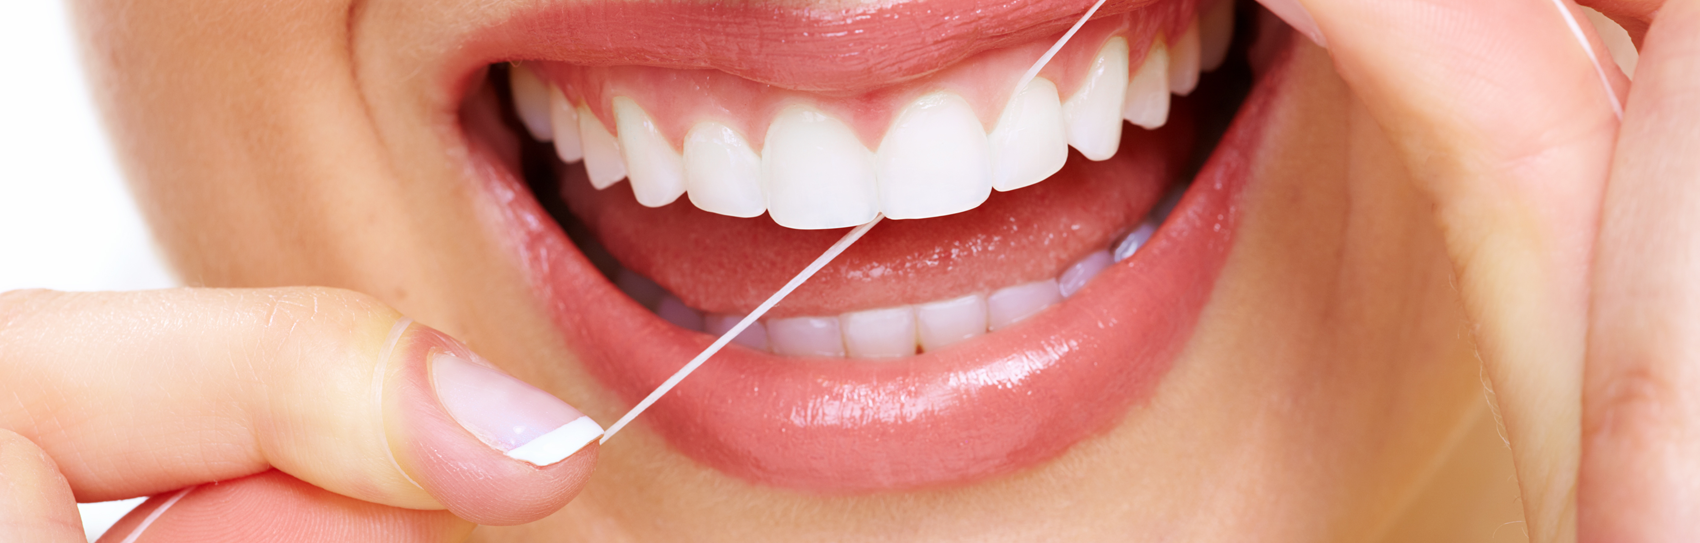 Why floss? And how should it be done?